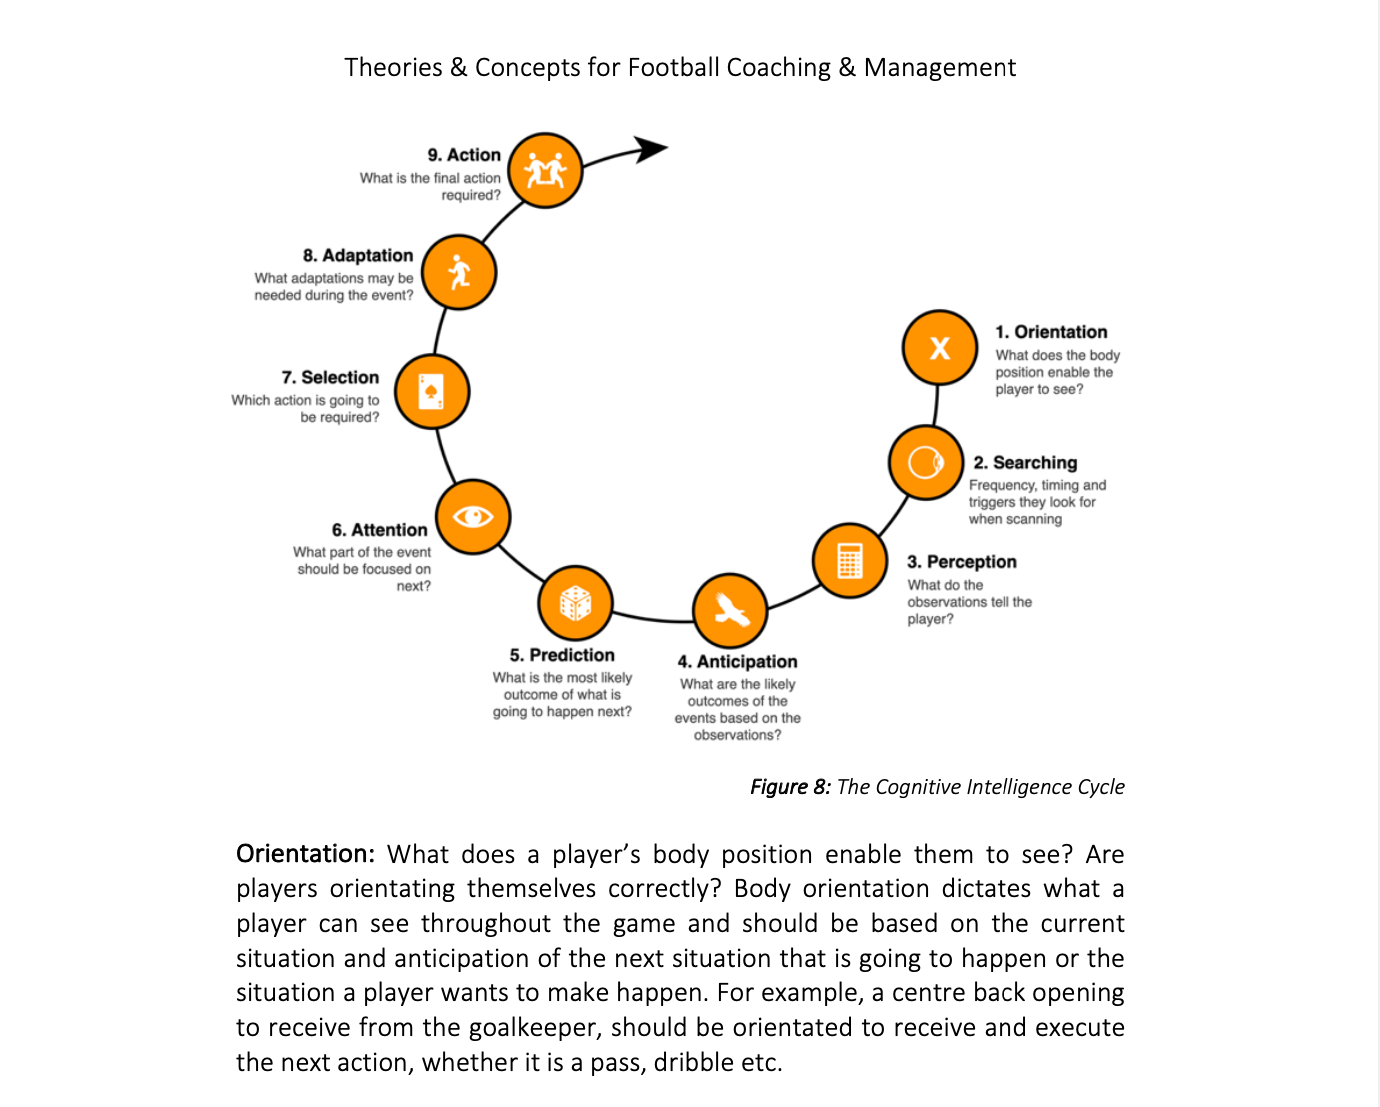 Theories & Concepts for Football Coaching & Management: PDF